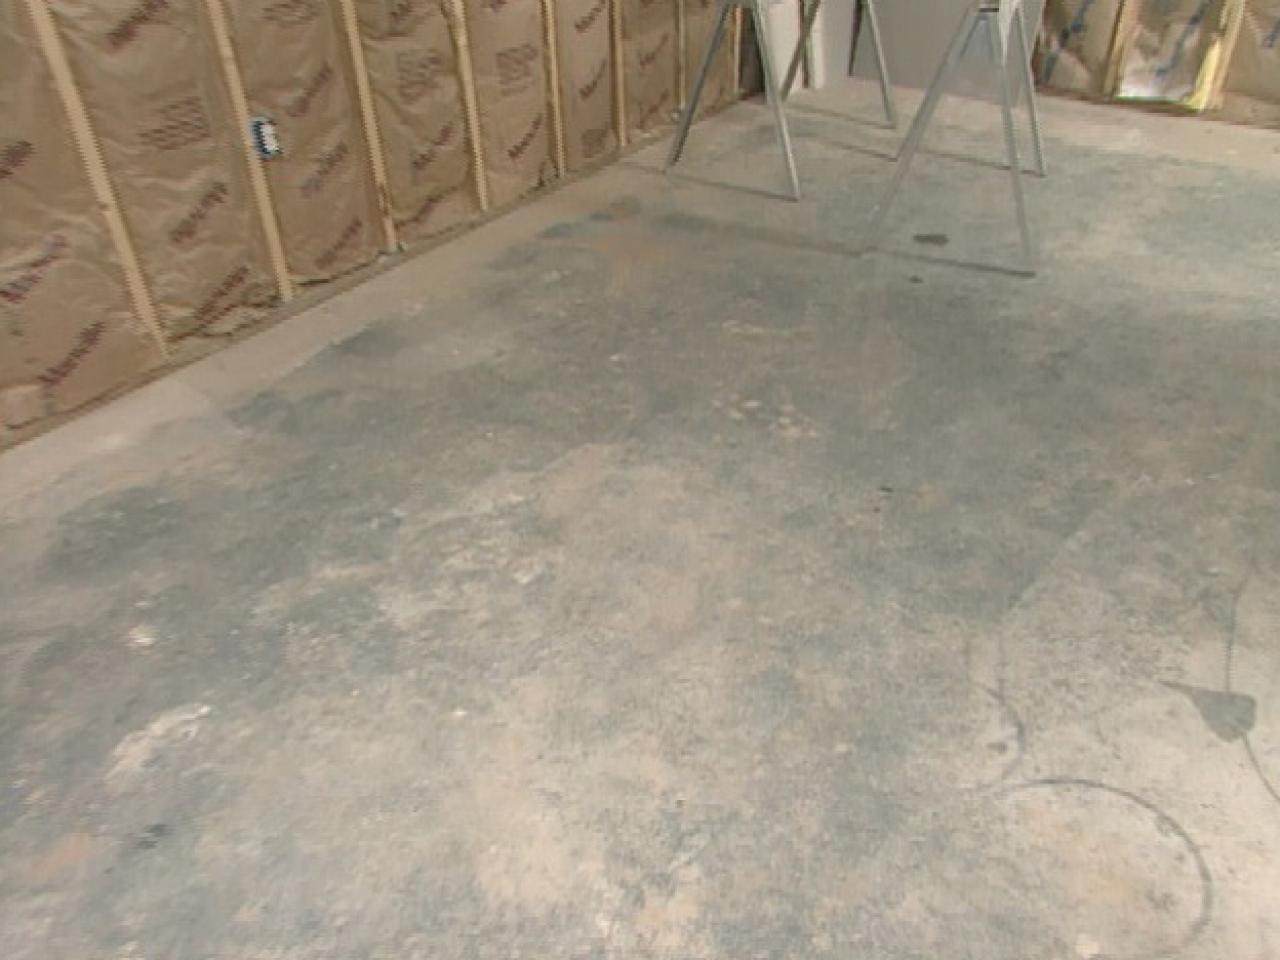 How To Install Subfloor Panels How Tos Diy,10 Year Anniversary Ideas For Husband